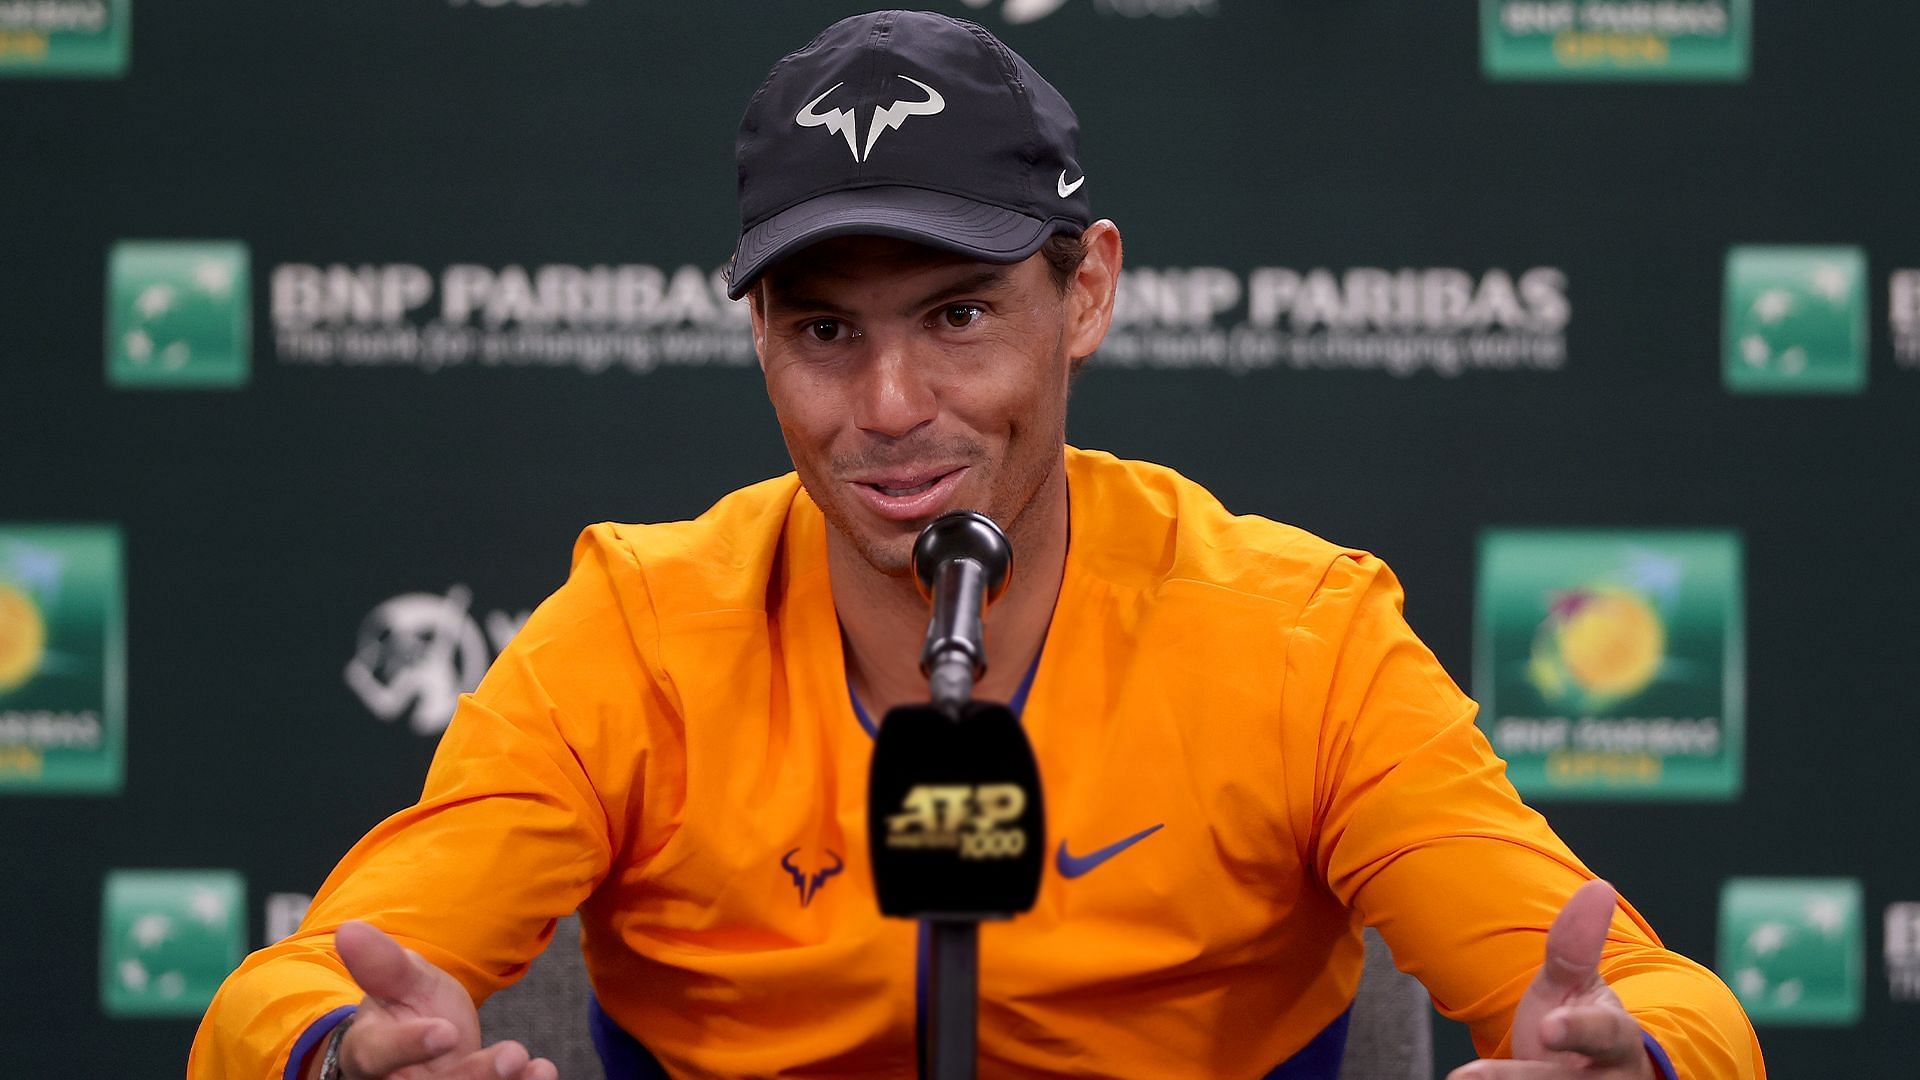 Is Rafael Nadal right to complain about the scheduling at Paris Olympics 2024?